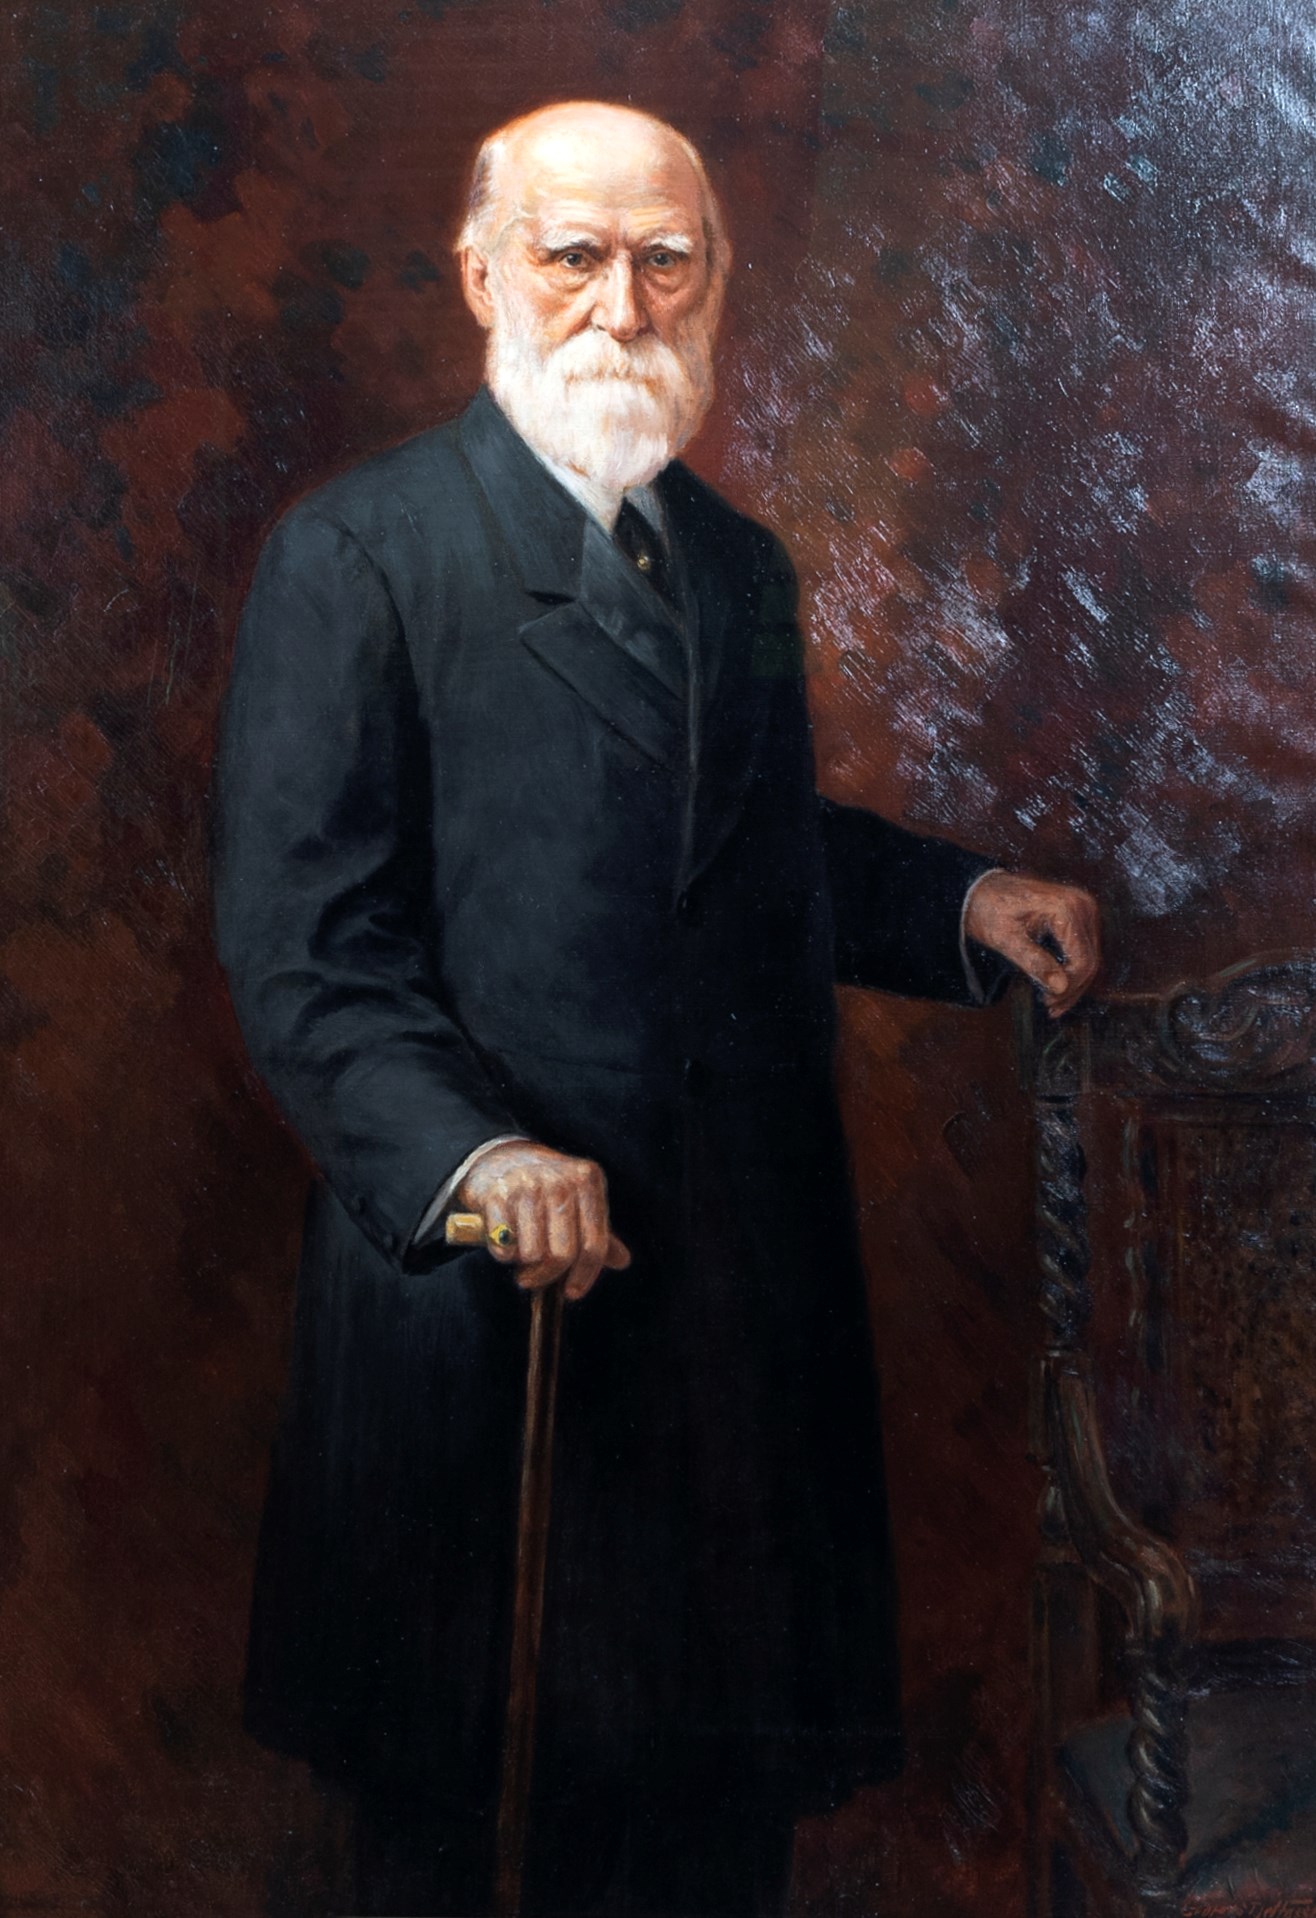 A portrait of Senator Georges-Casimir Dessaulles, painted for his 100th birthday. The entrepreneur from Saint-Hyacinthe, Quebec, served in the Senate from 1907 until his death in 1930. Artist Georges Delfosse was commissioned to paint this portrait. (Oil on canvas, H: 169.5cm x W: 126.5cm, Senate Artwork and Heritage Collection.)